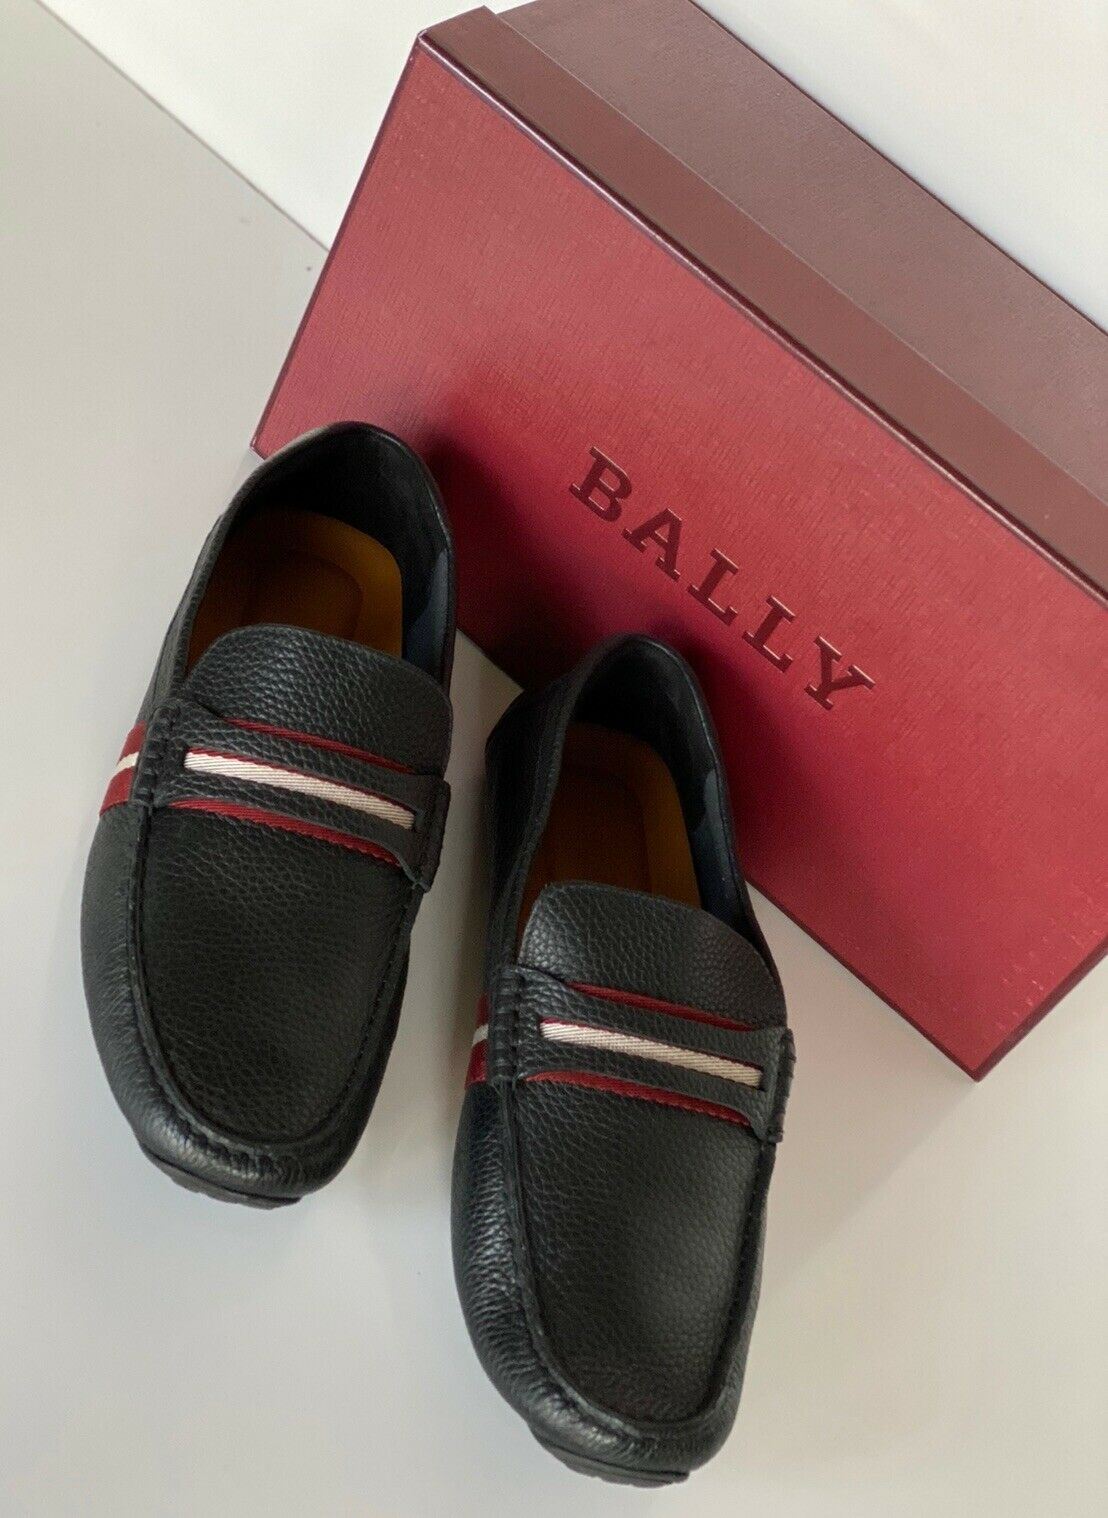 NIB Bally Mens Bovine Grained Leather Driver Shoes Black 12 D US 6228298 Italy